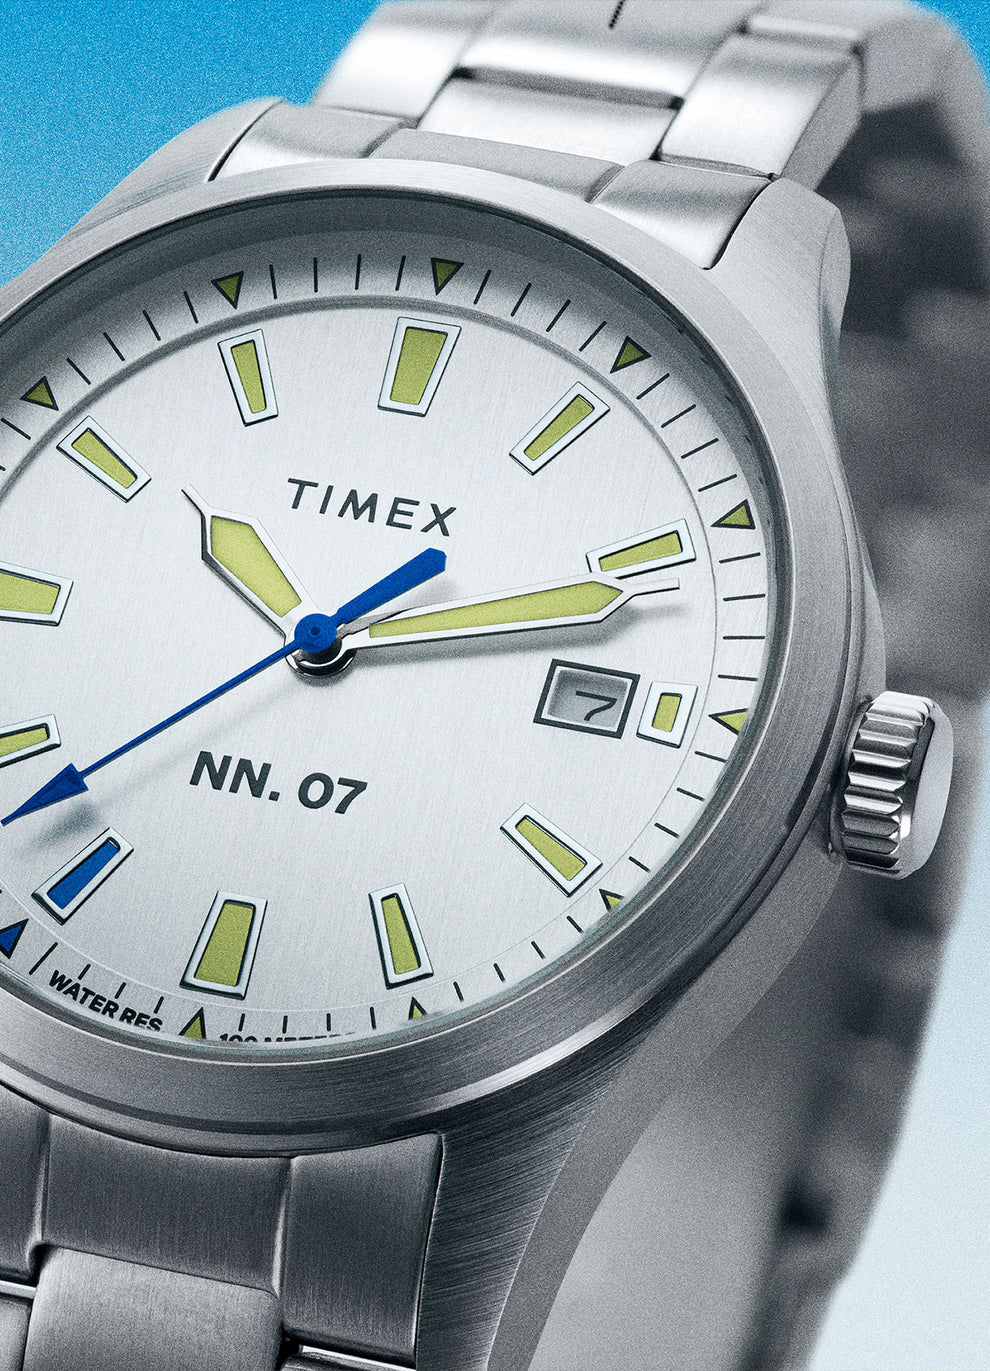 Close up dial image showing the dial of Timex x NN.07